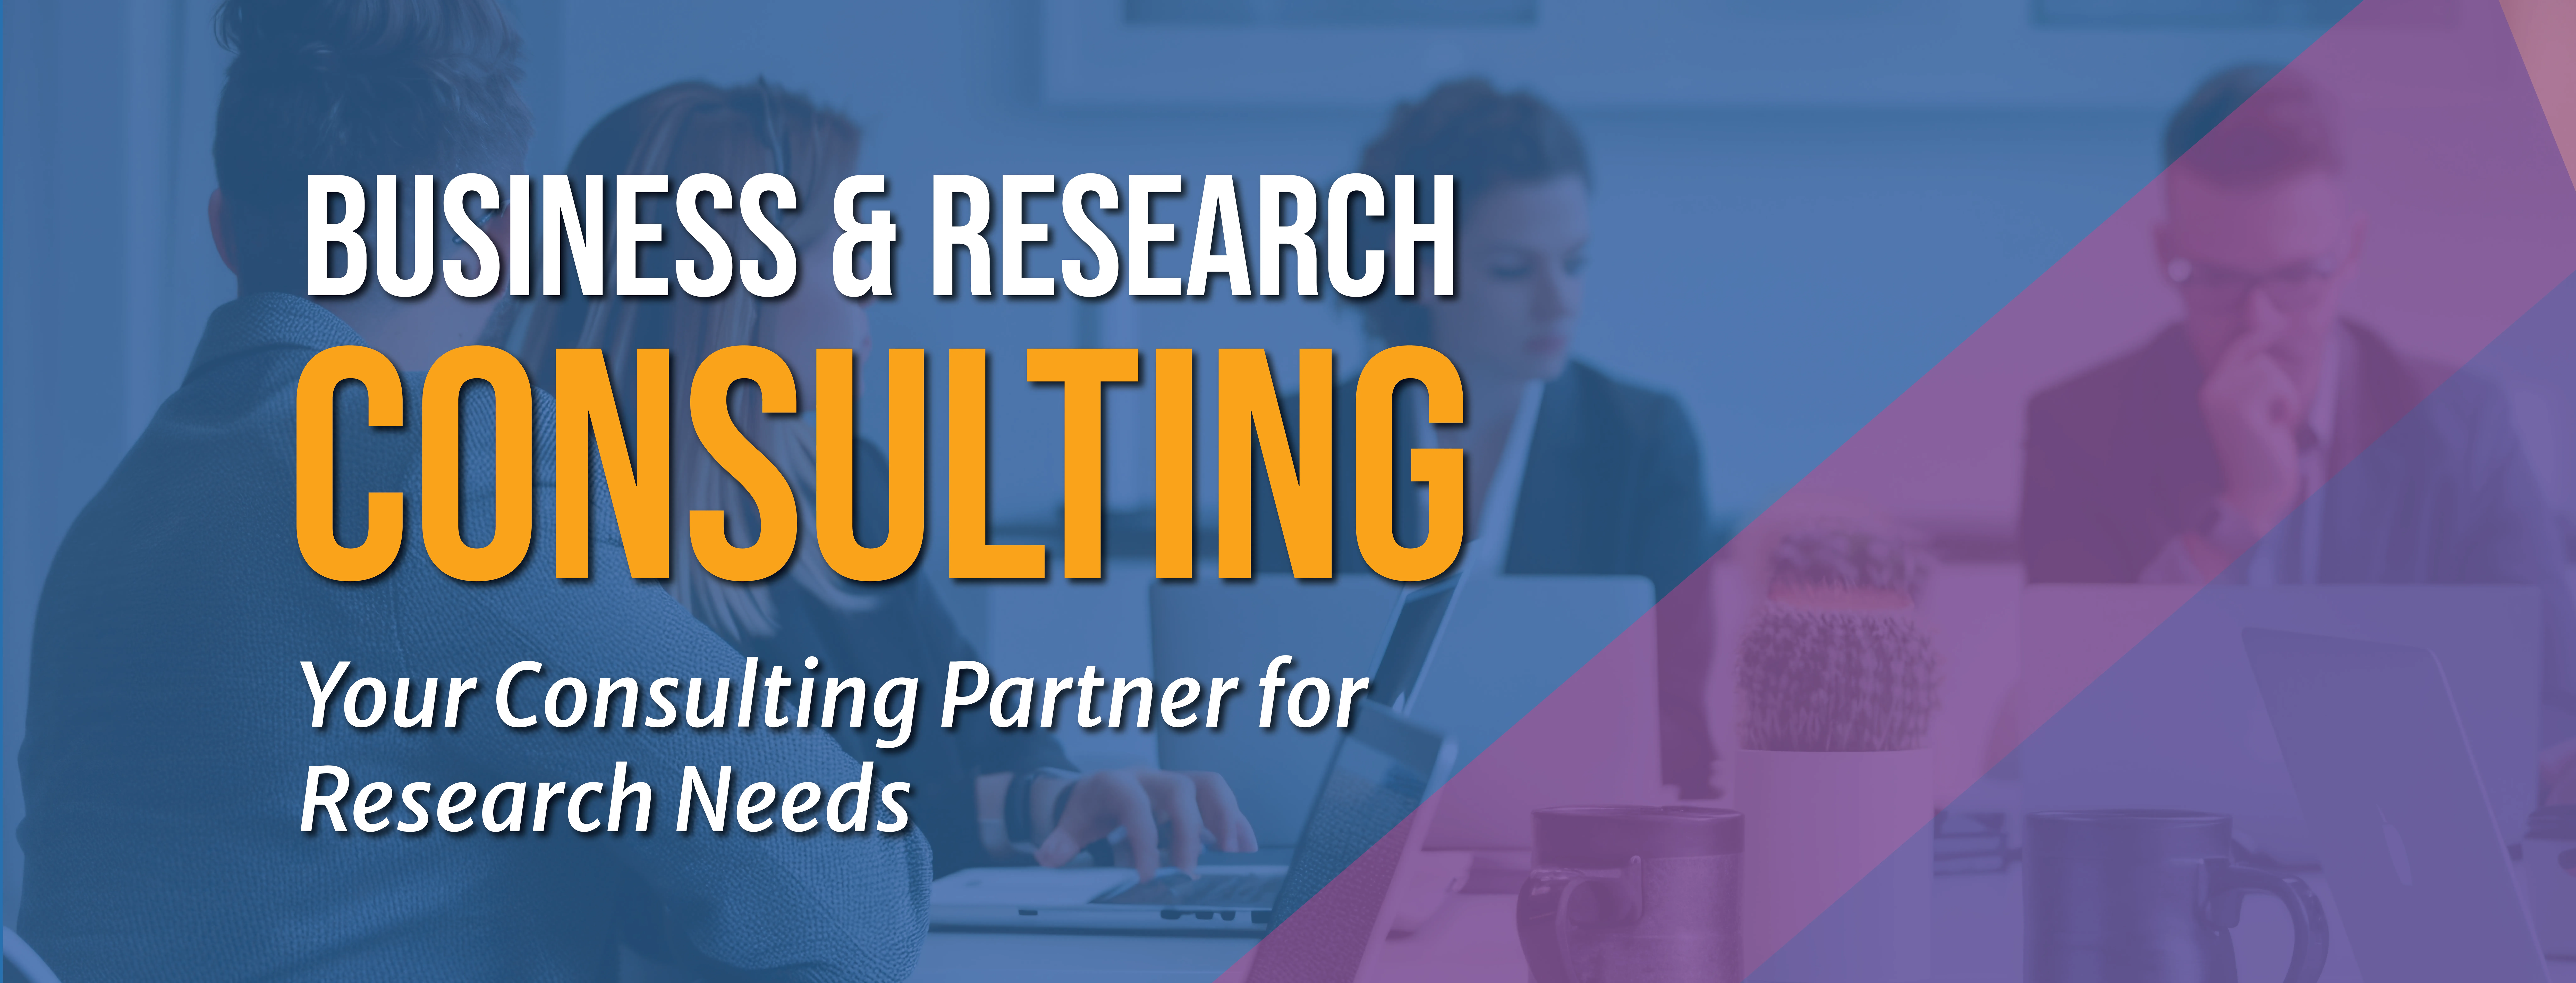 Business & Research Consulting